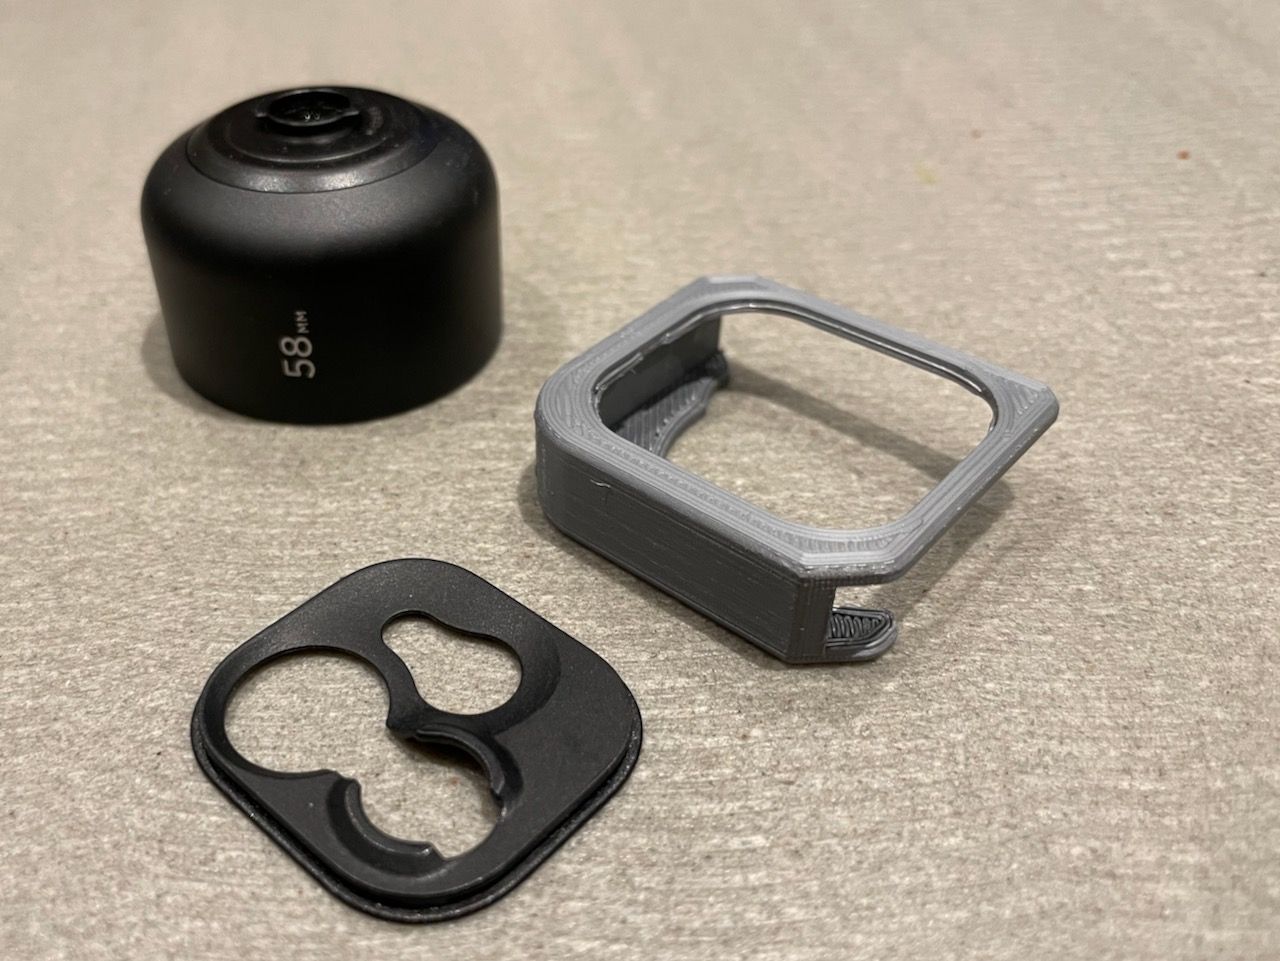 The Moment drop-in mount (black piece) was removed for this photo. It fits tightly in the grey body mount and can be left in during day-to-day use.